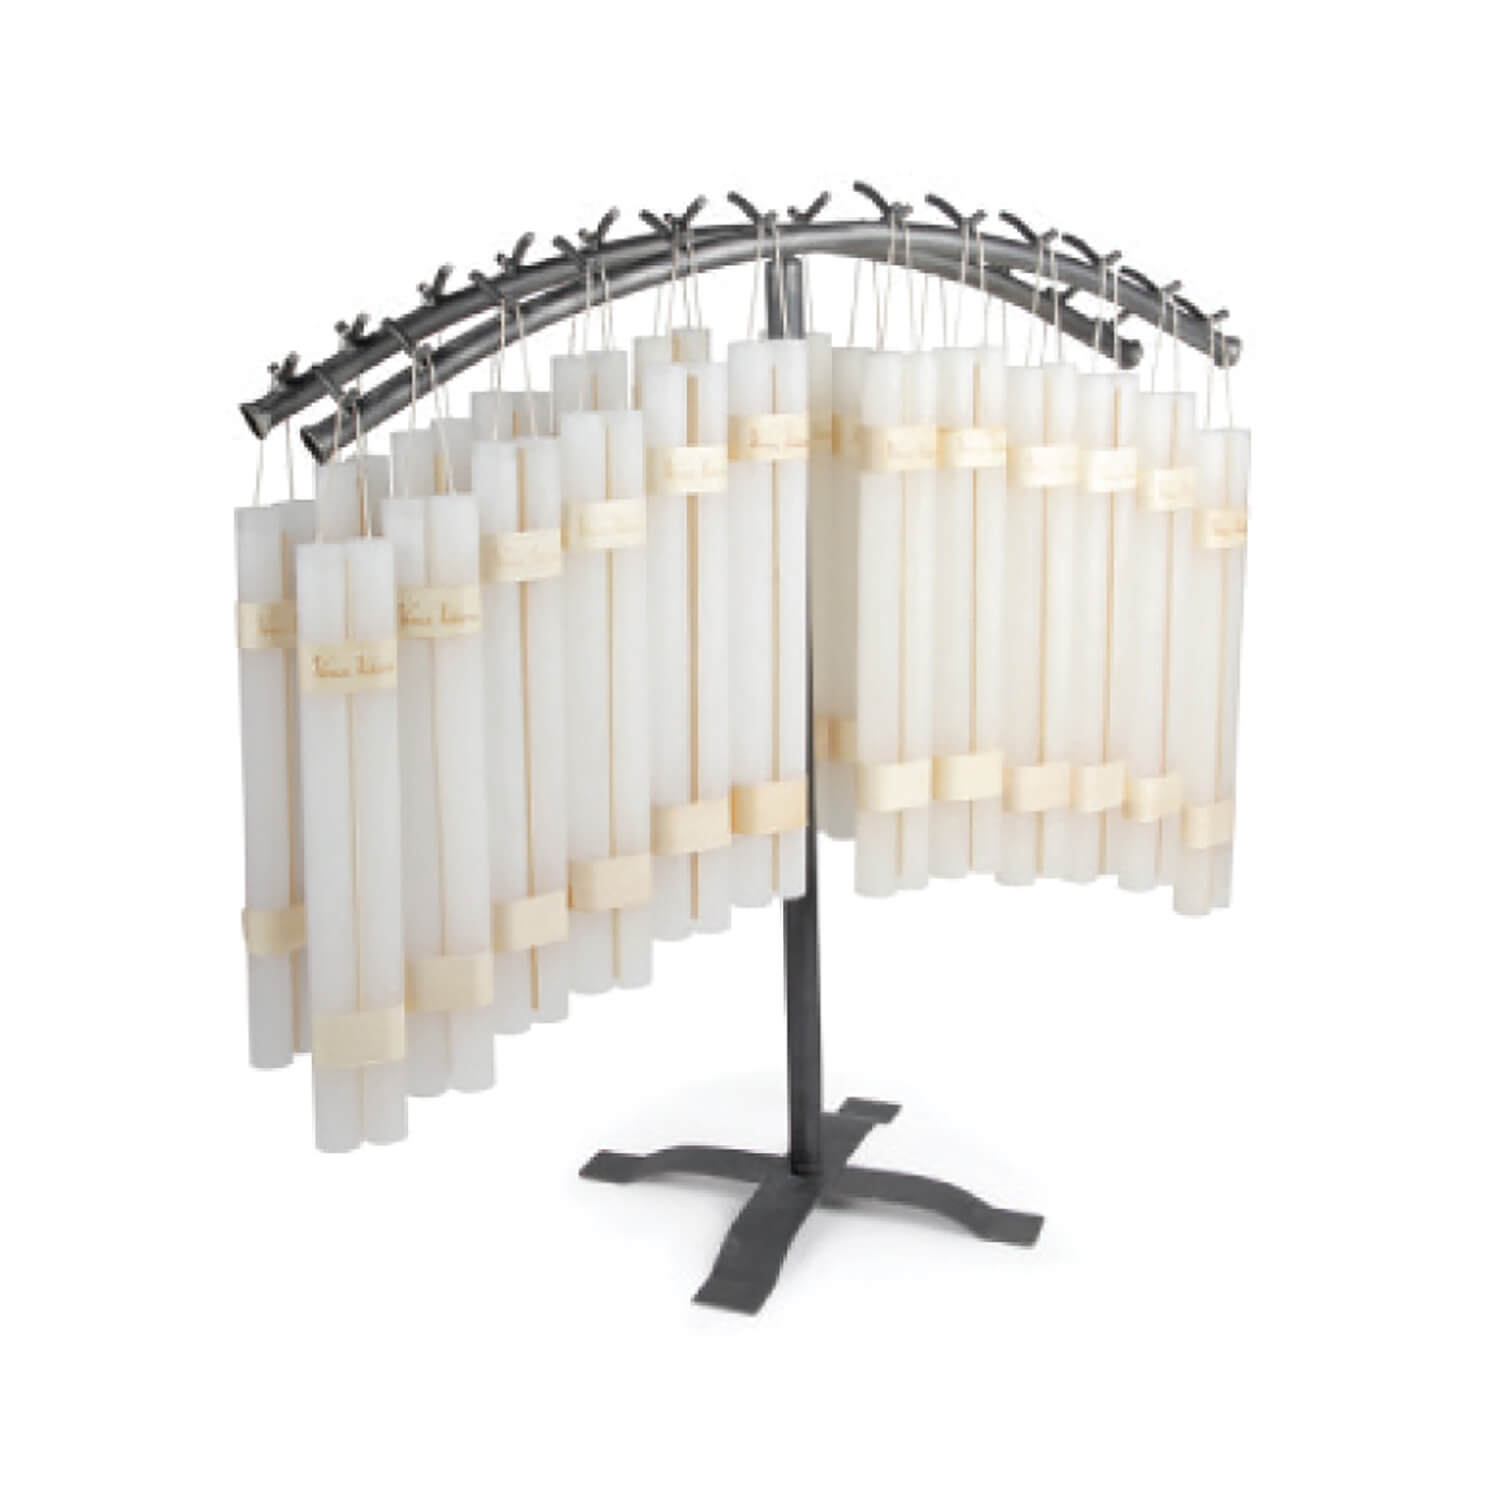 IRON TAPER CANDLE DISPLAY